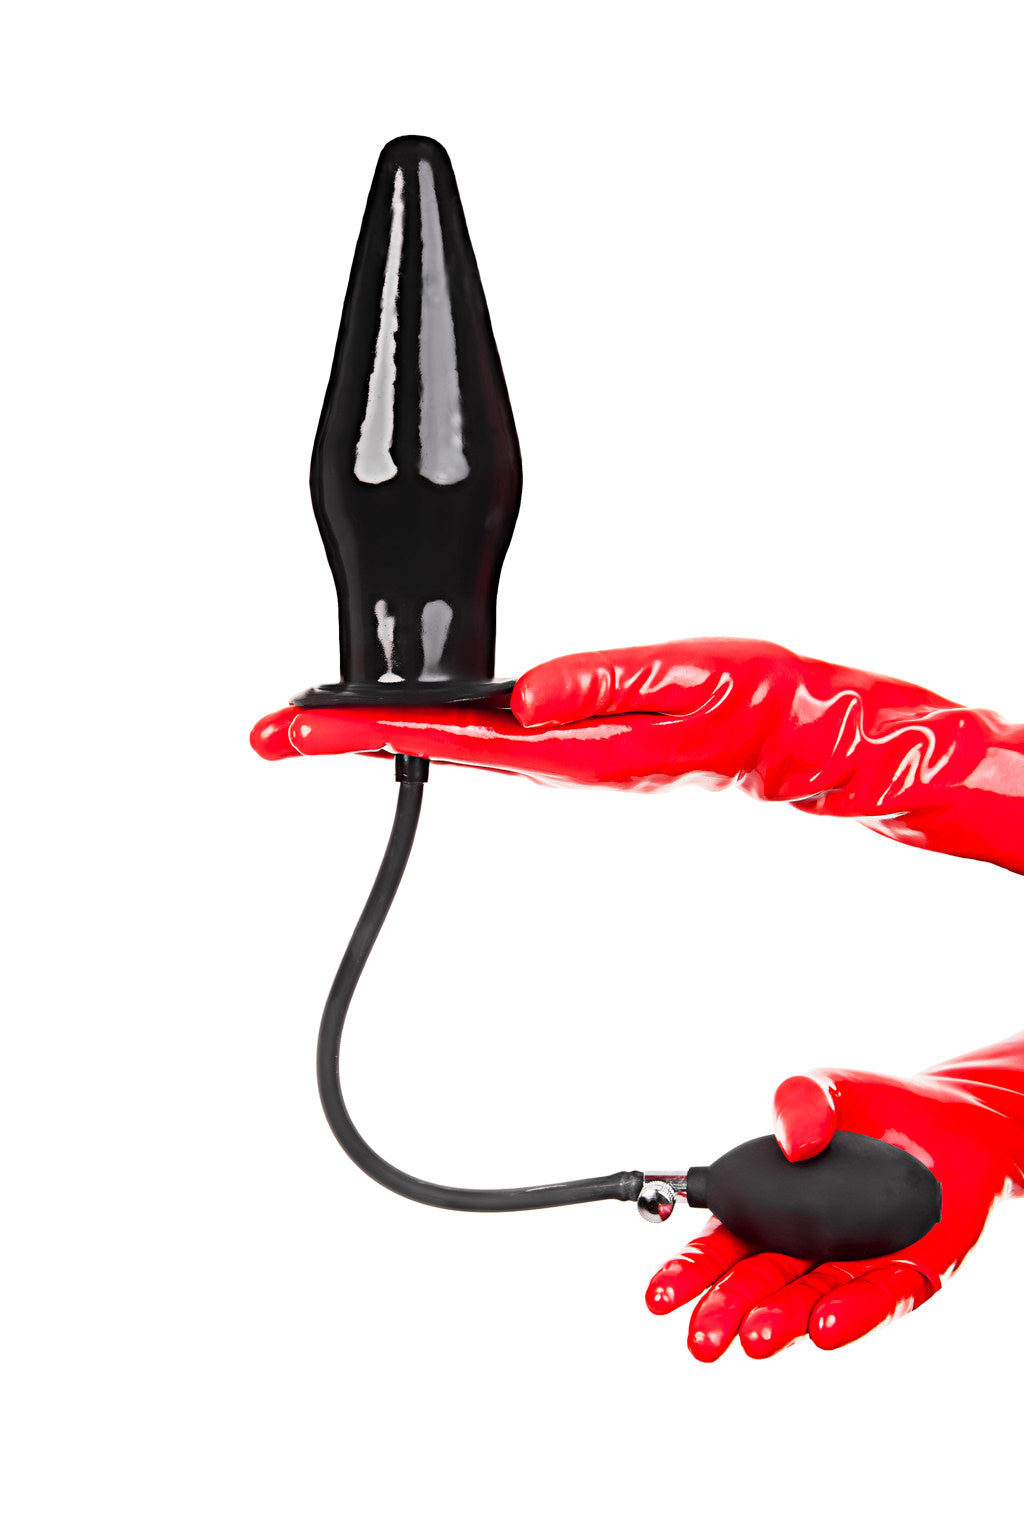 Red latex gloves holding a XXL inflatable butt plug.